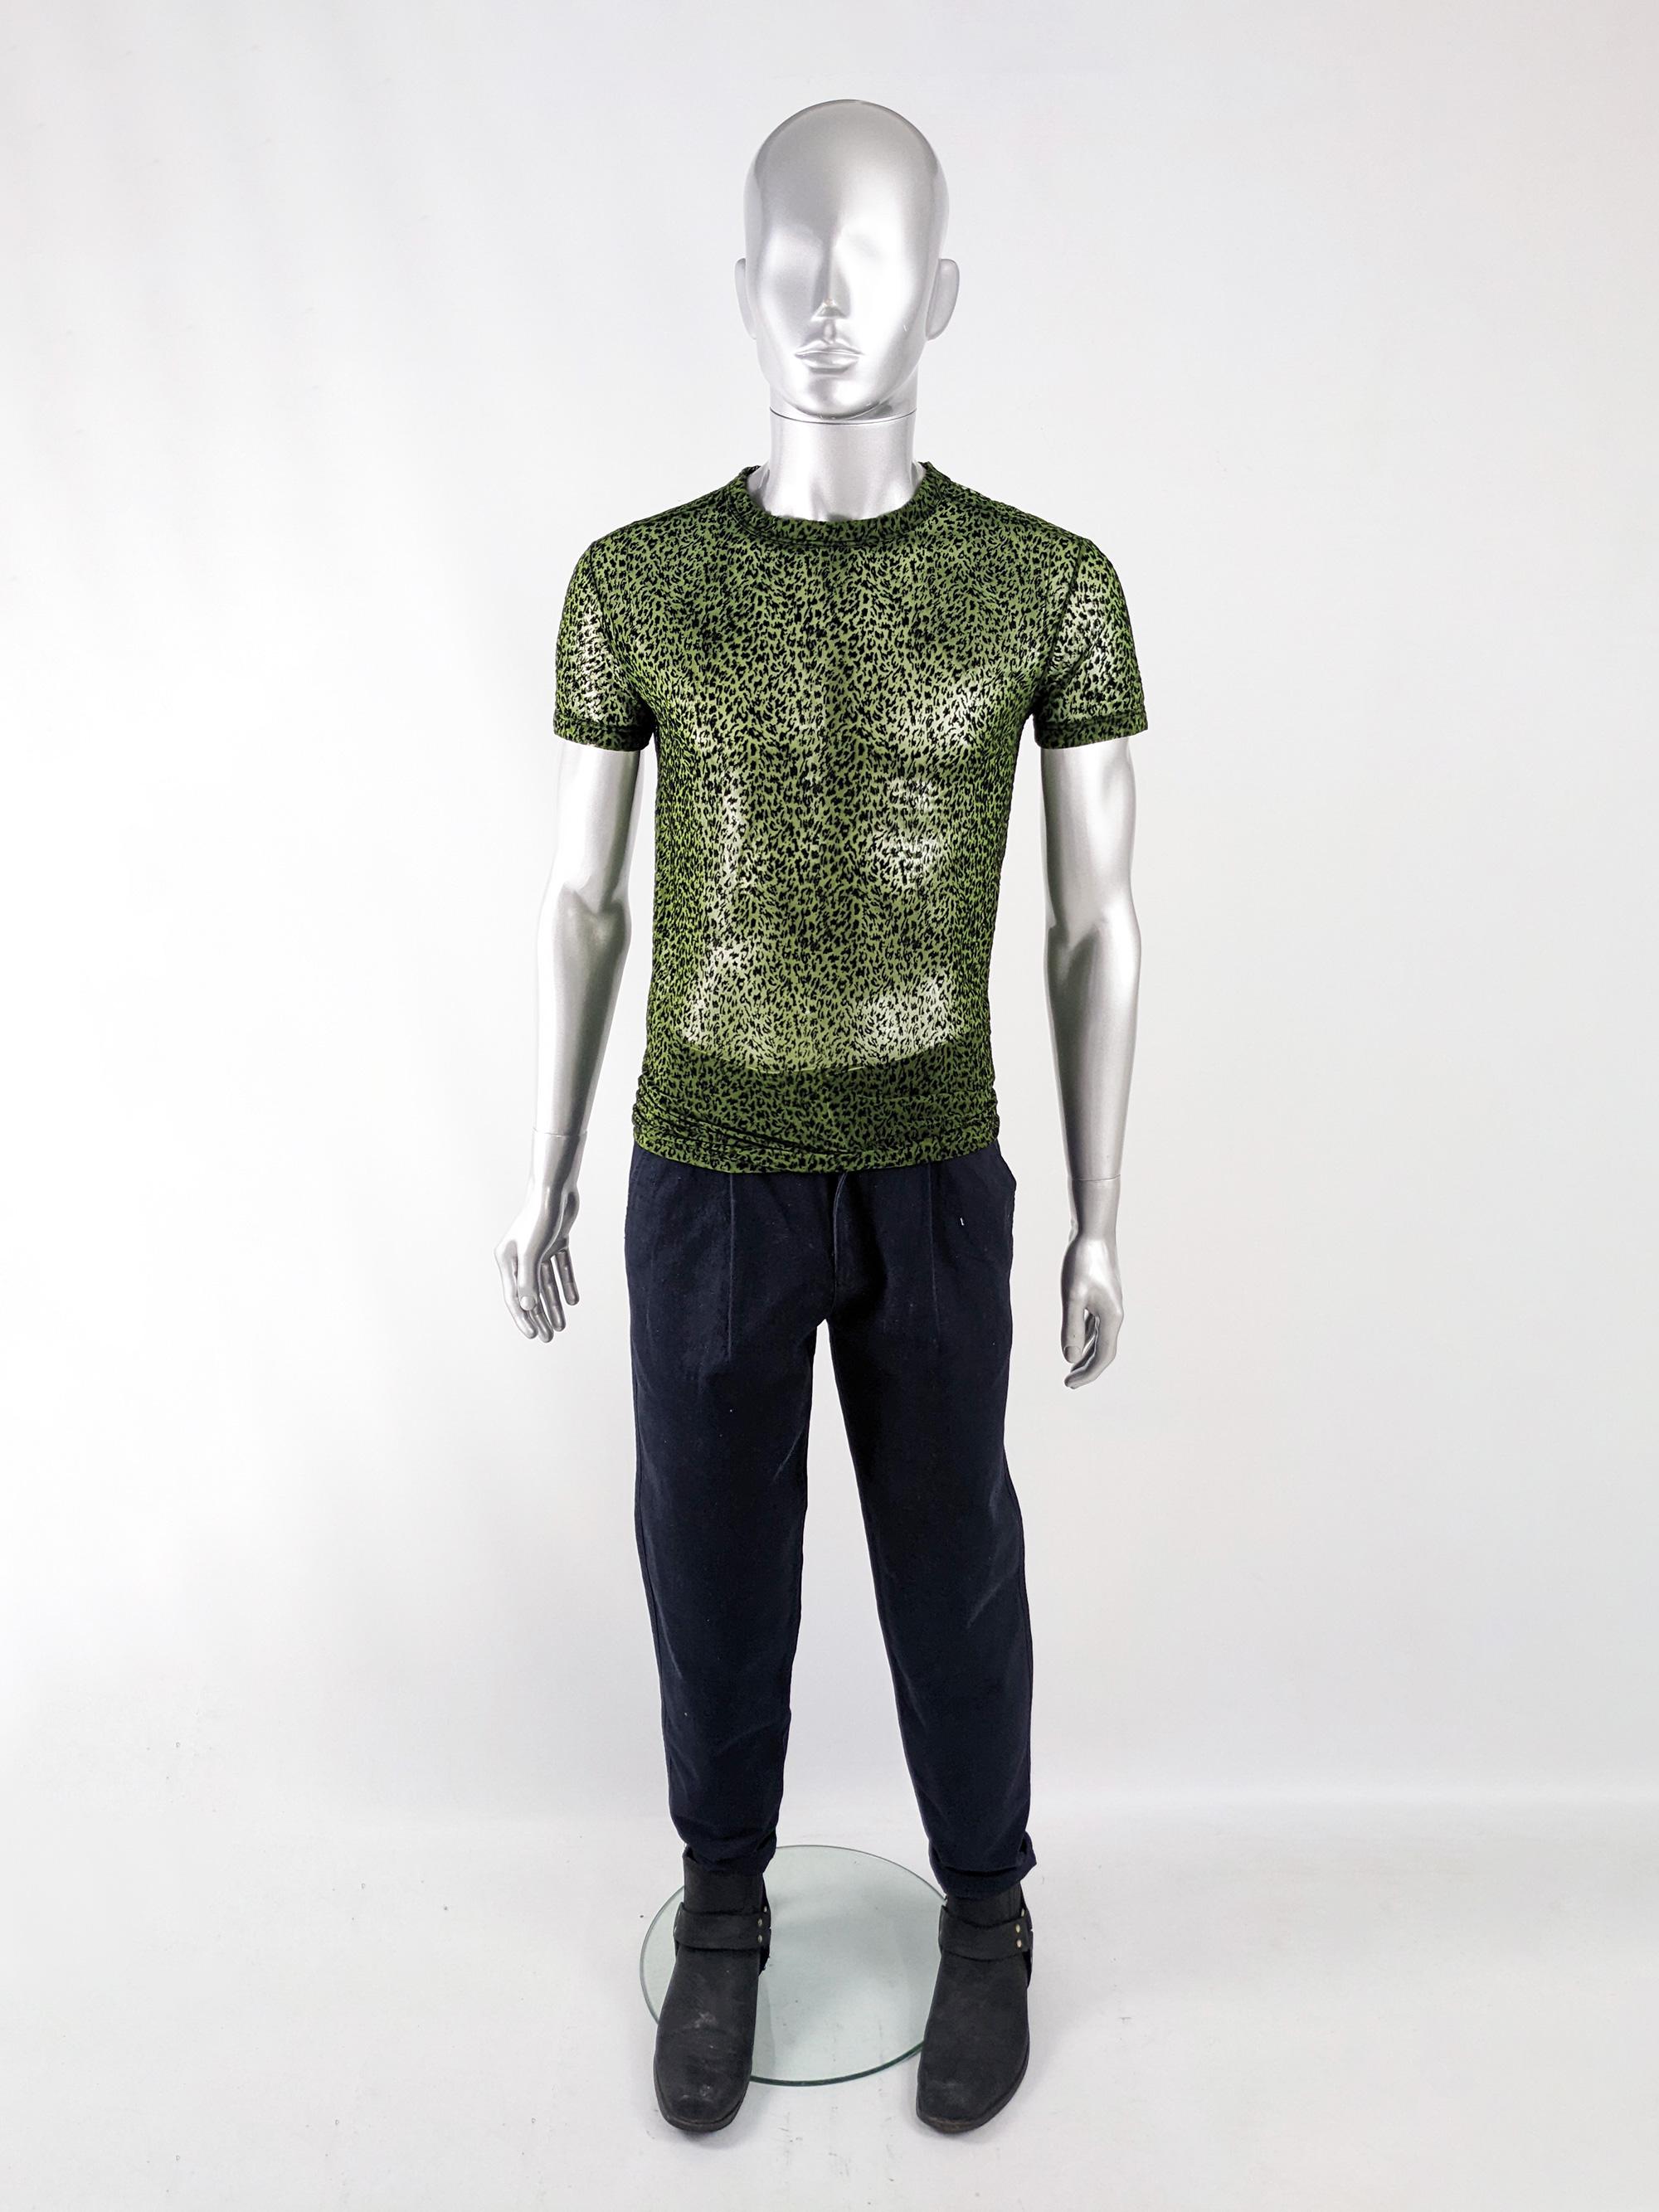 An incredible and rare vintage mens short sleeve top from the late 90s by luxury Italian fashion designer, Gianni Versace for the Versus Versace line. In a green sheer mesh with black flocking throuhgout creating an animal print.

Size: Marked